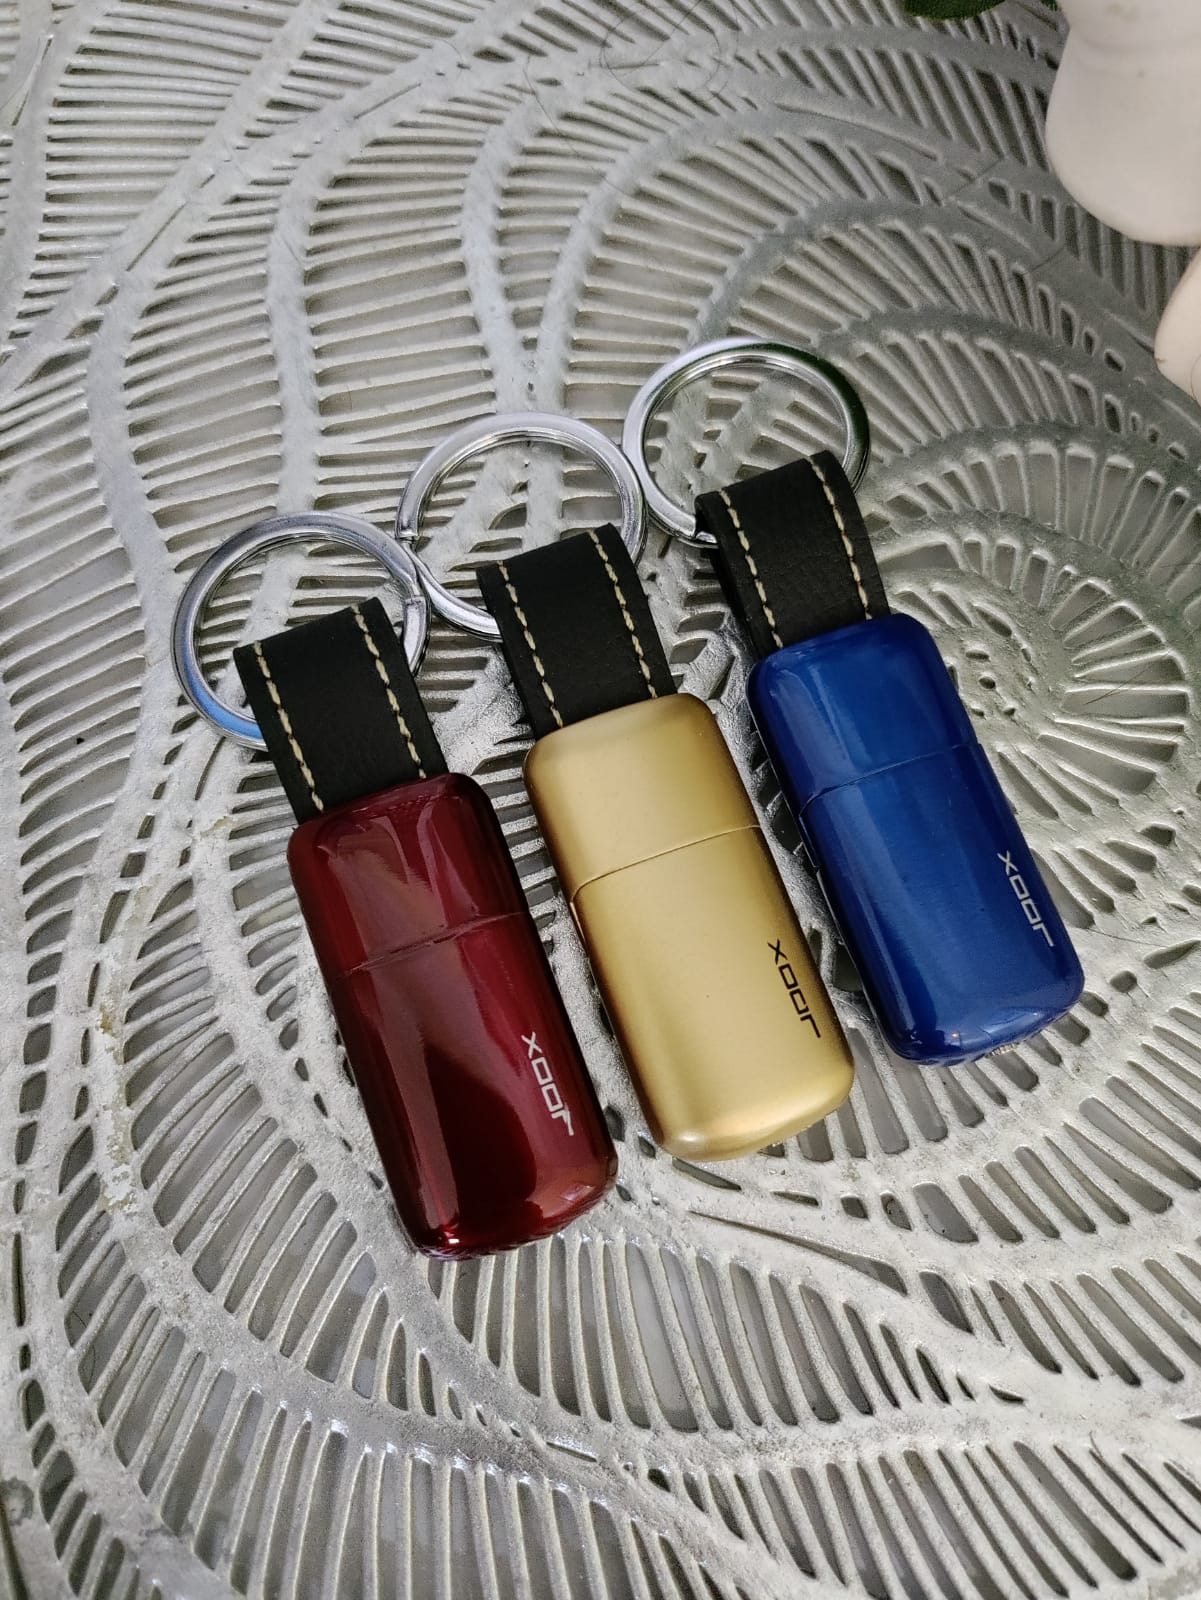 Loox lighter with keychain